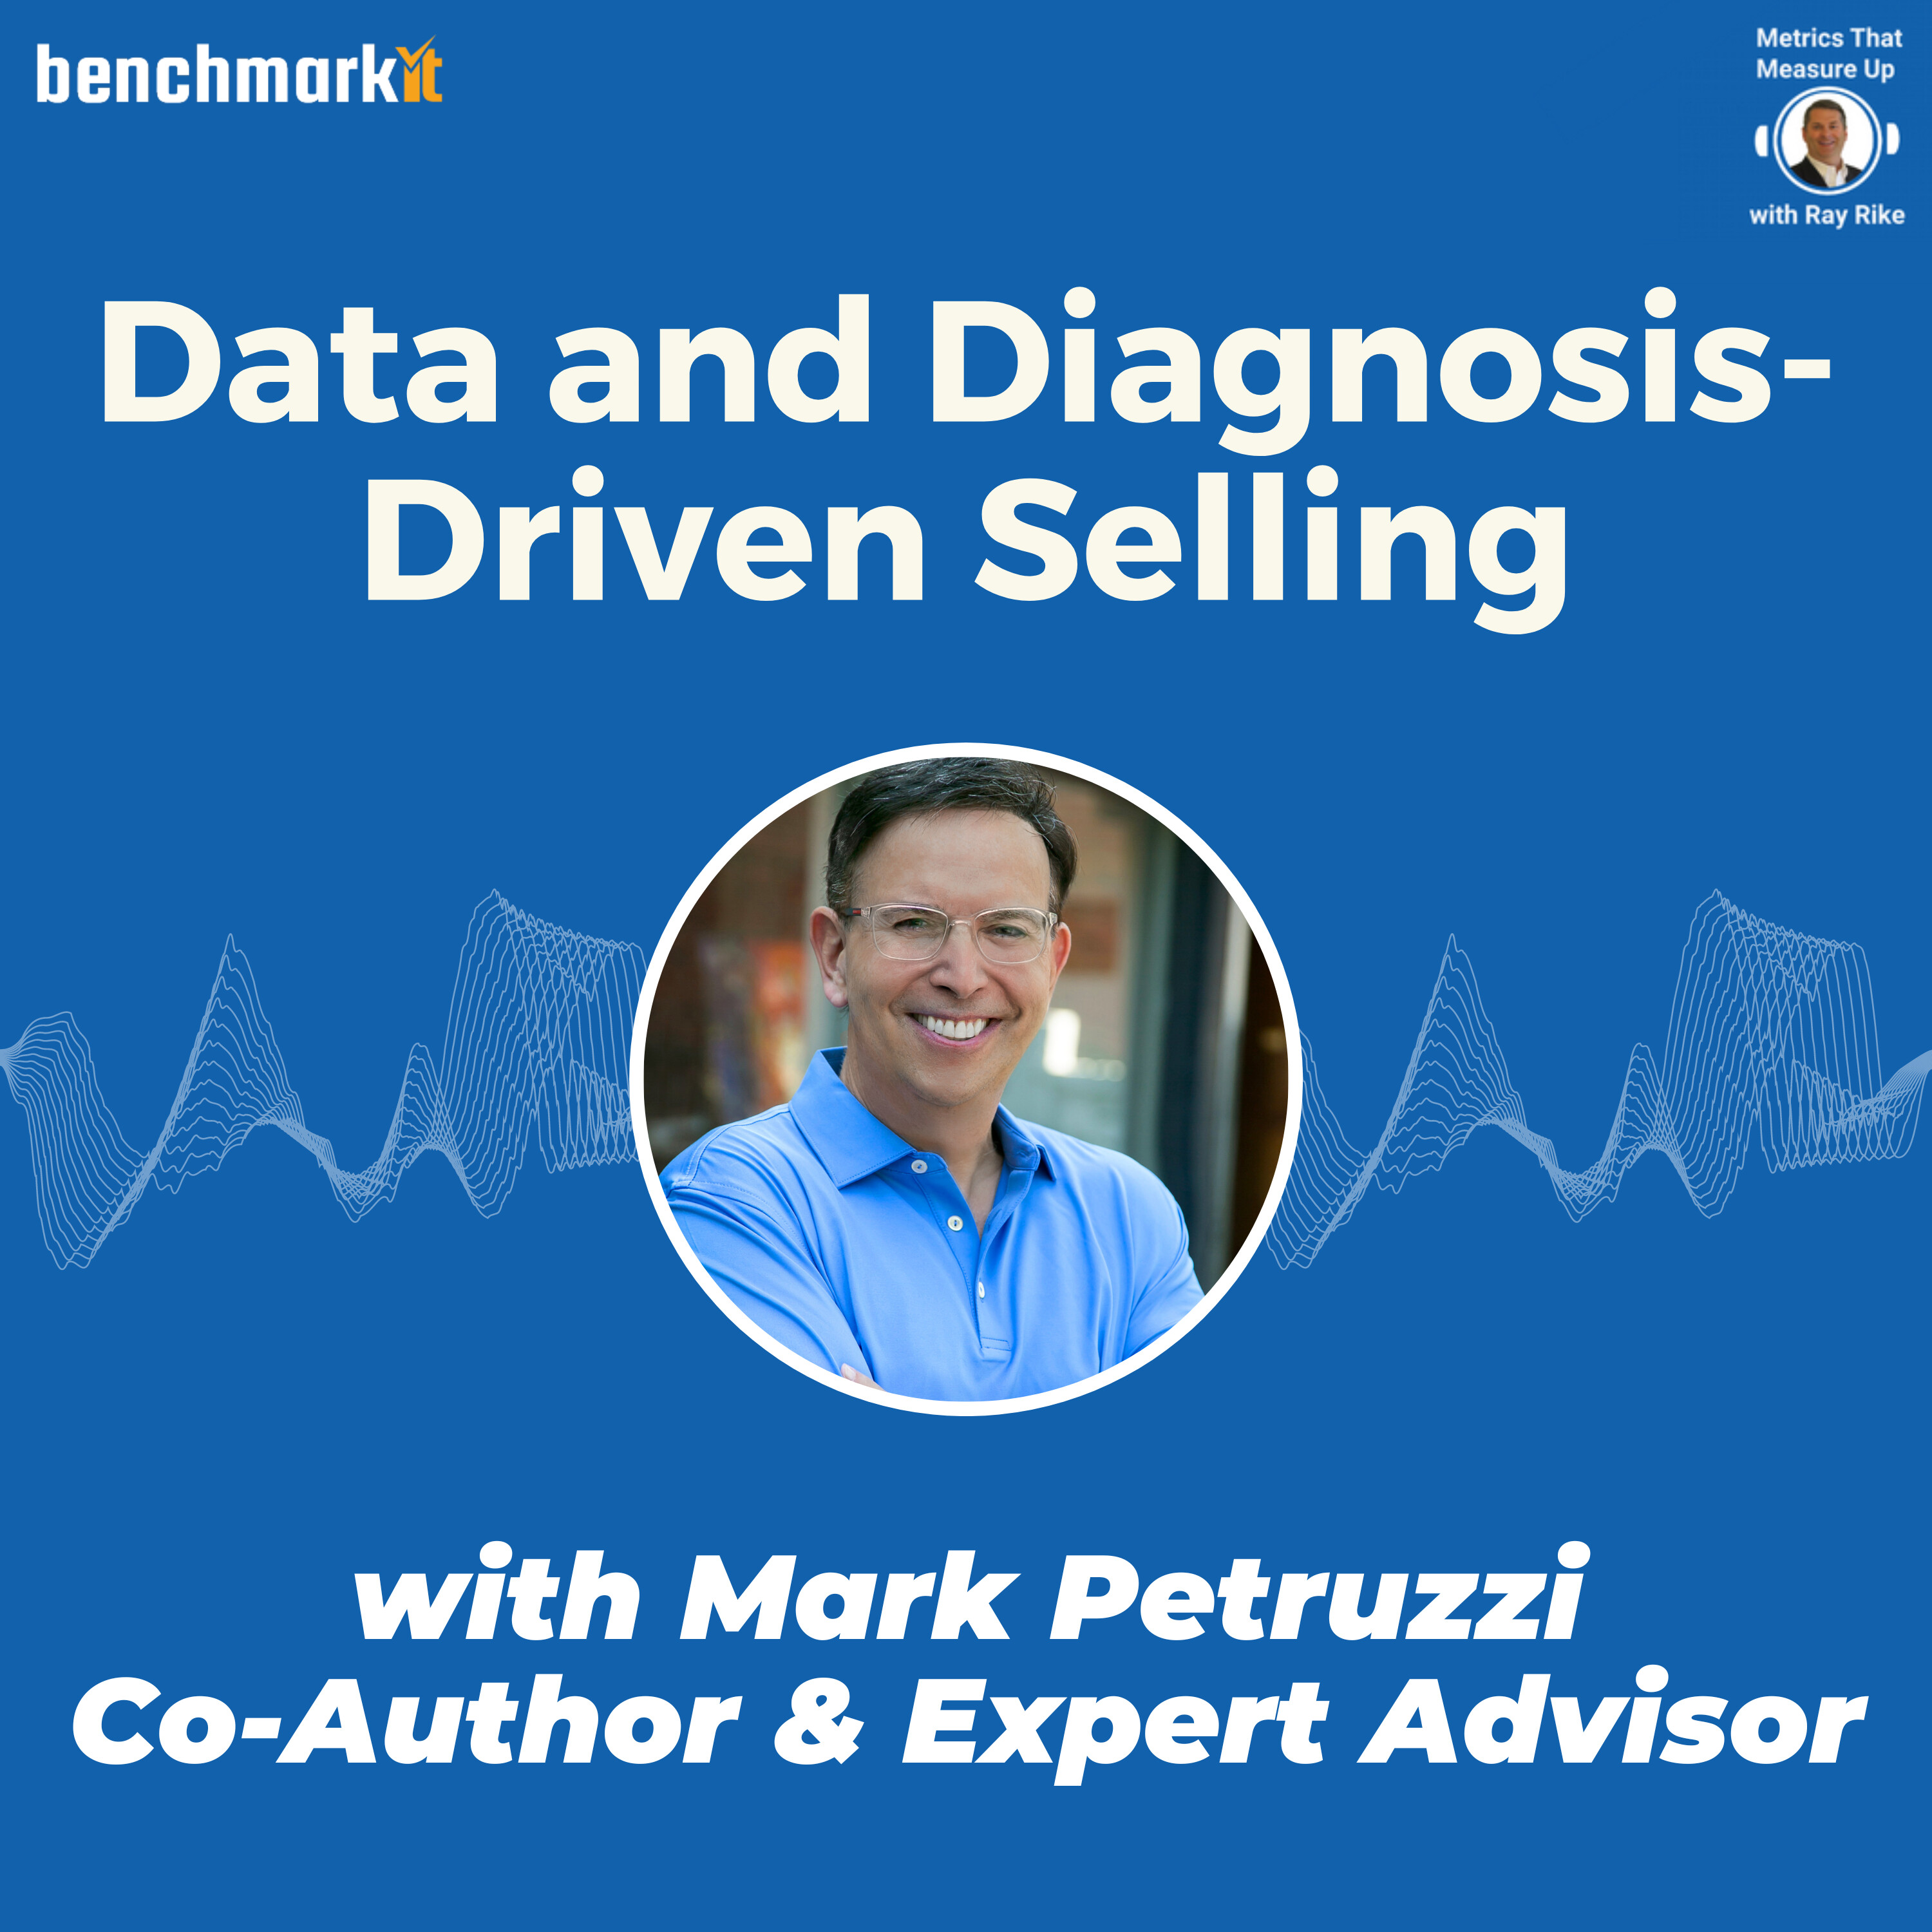 Data and Diagnosis-Driven Selling - with Mark Petruzzi, Author